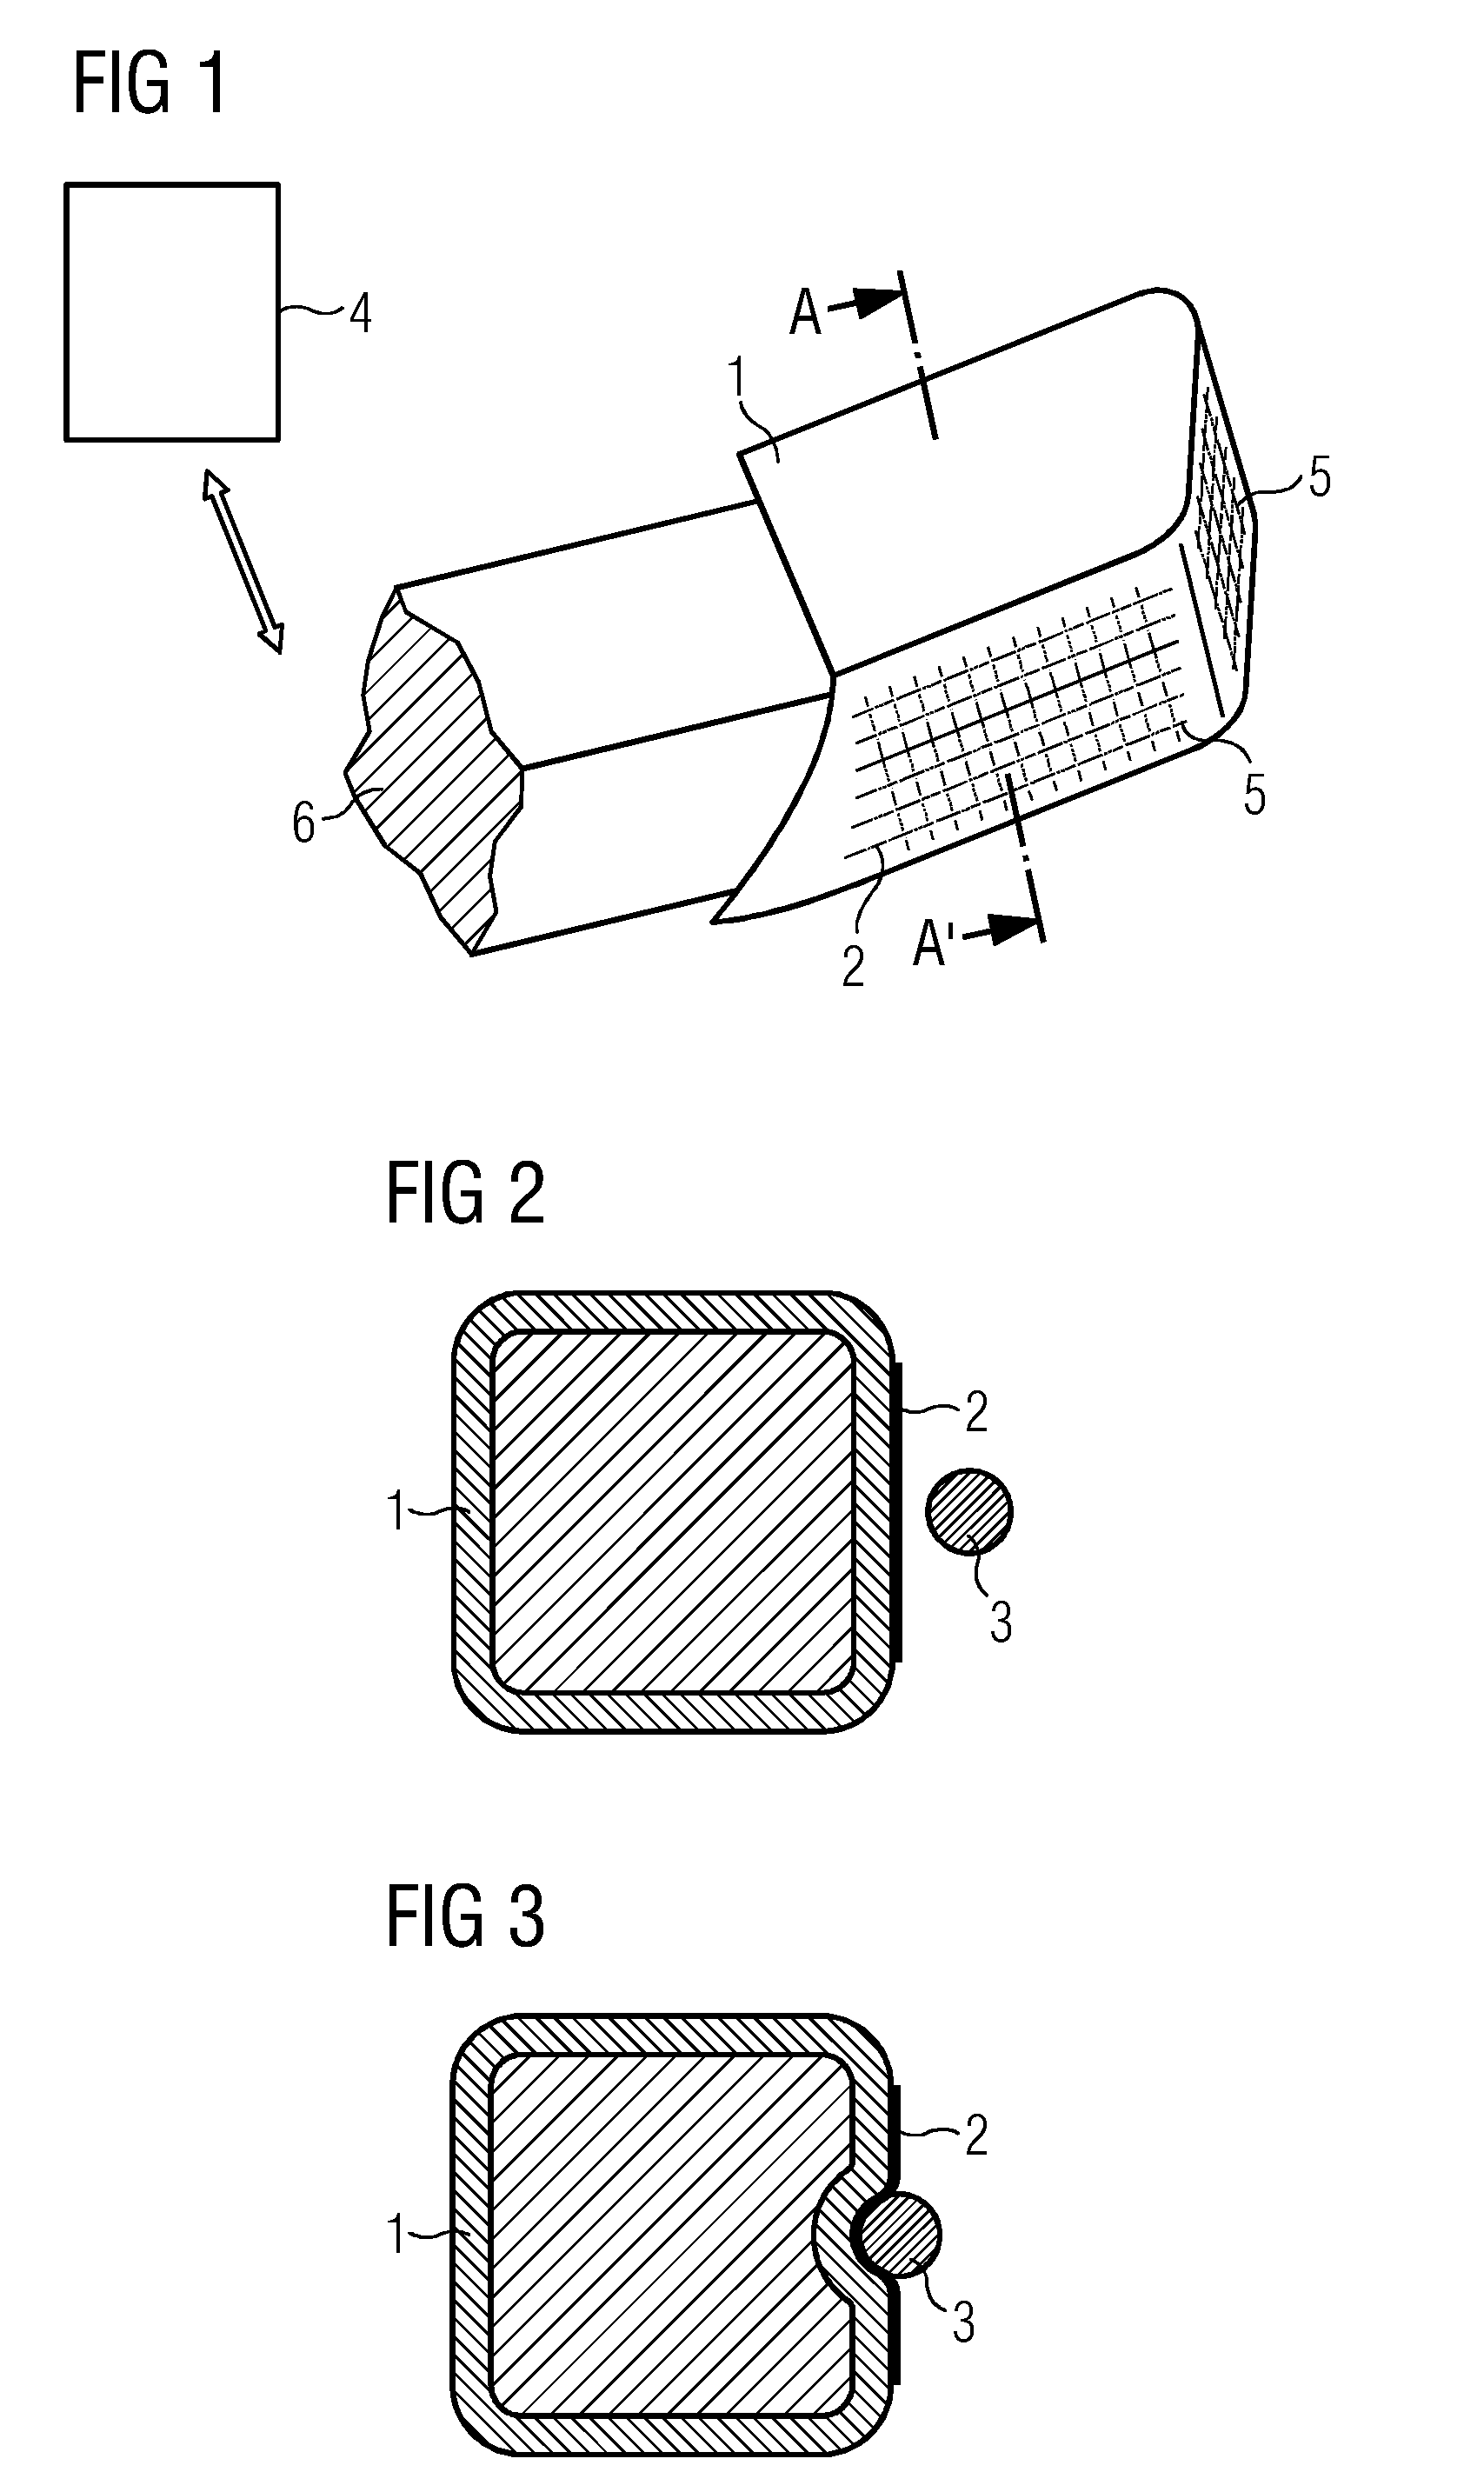 Housing Cladding Module with Collision Identification for Medical Devices